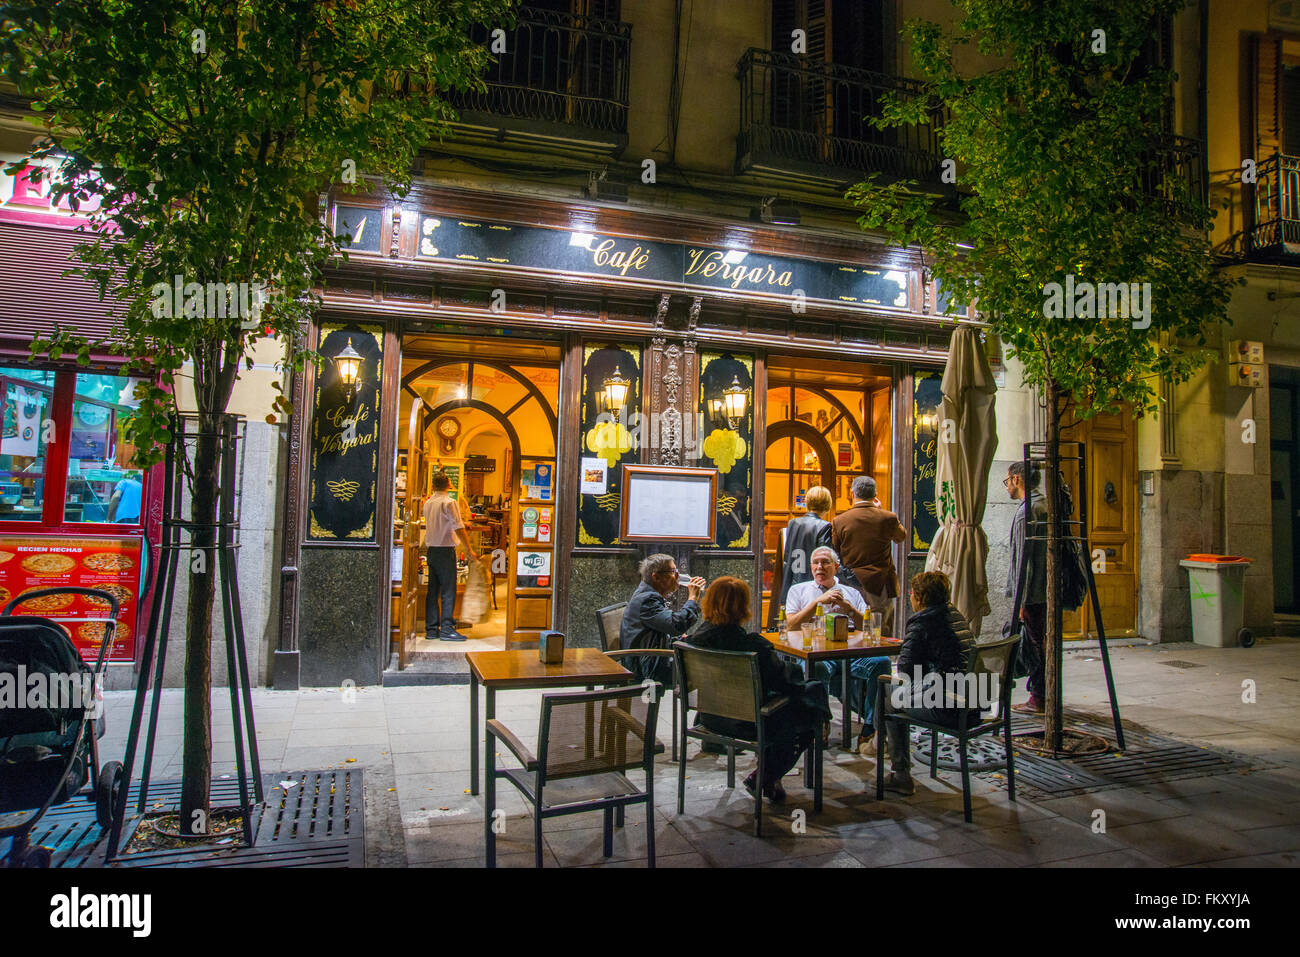 Facade and terrace of Cafe Vergara, night view. Isabel II Square, Madrid, Spain. Stock Photo